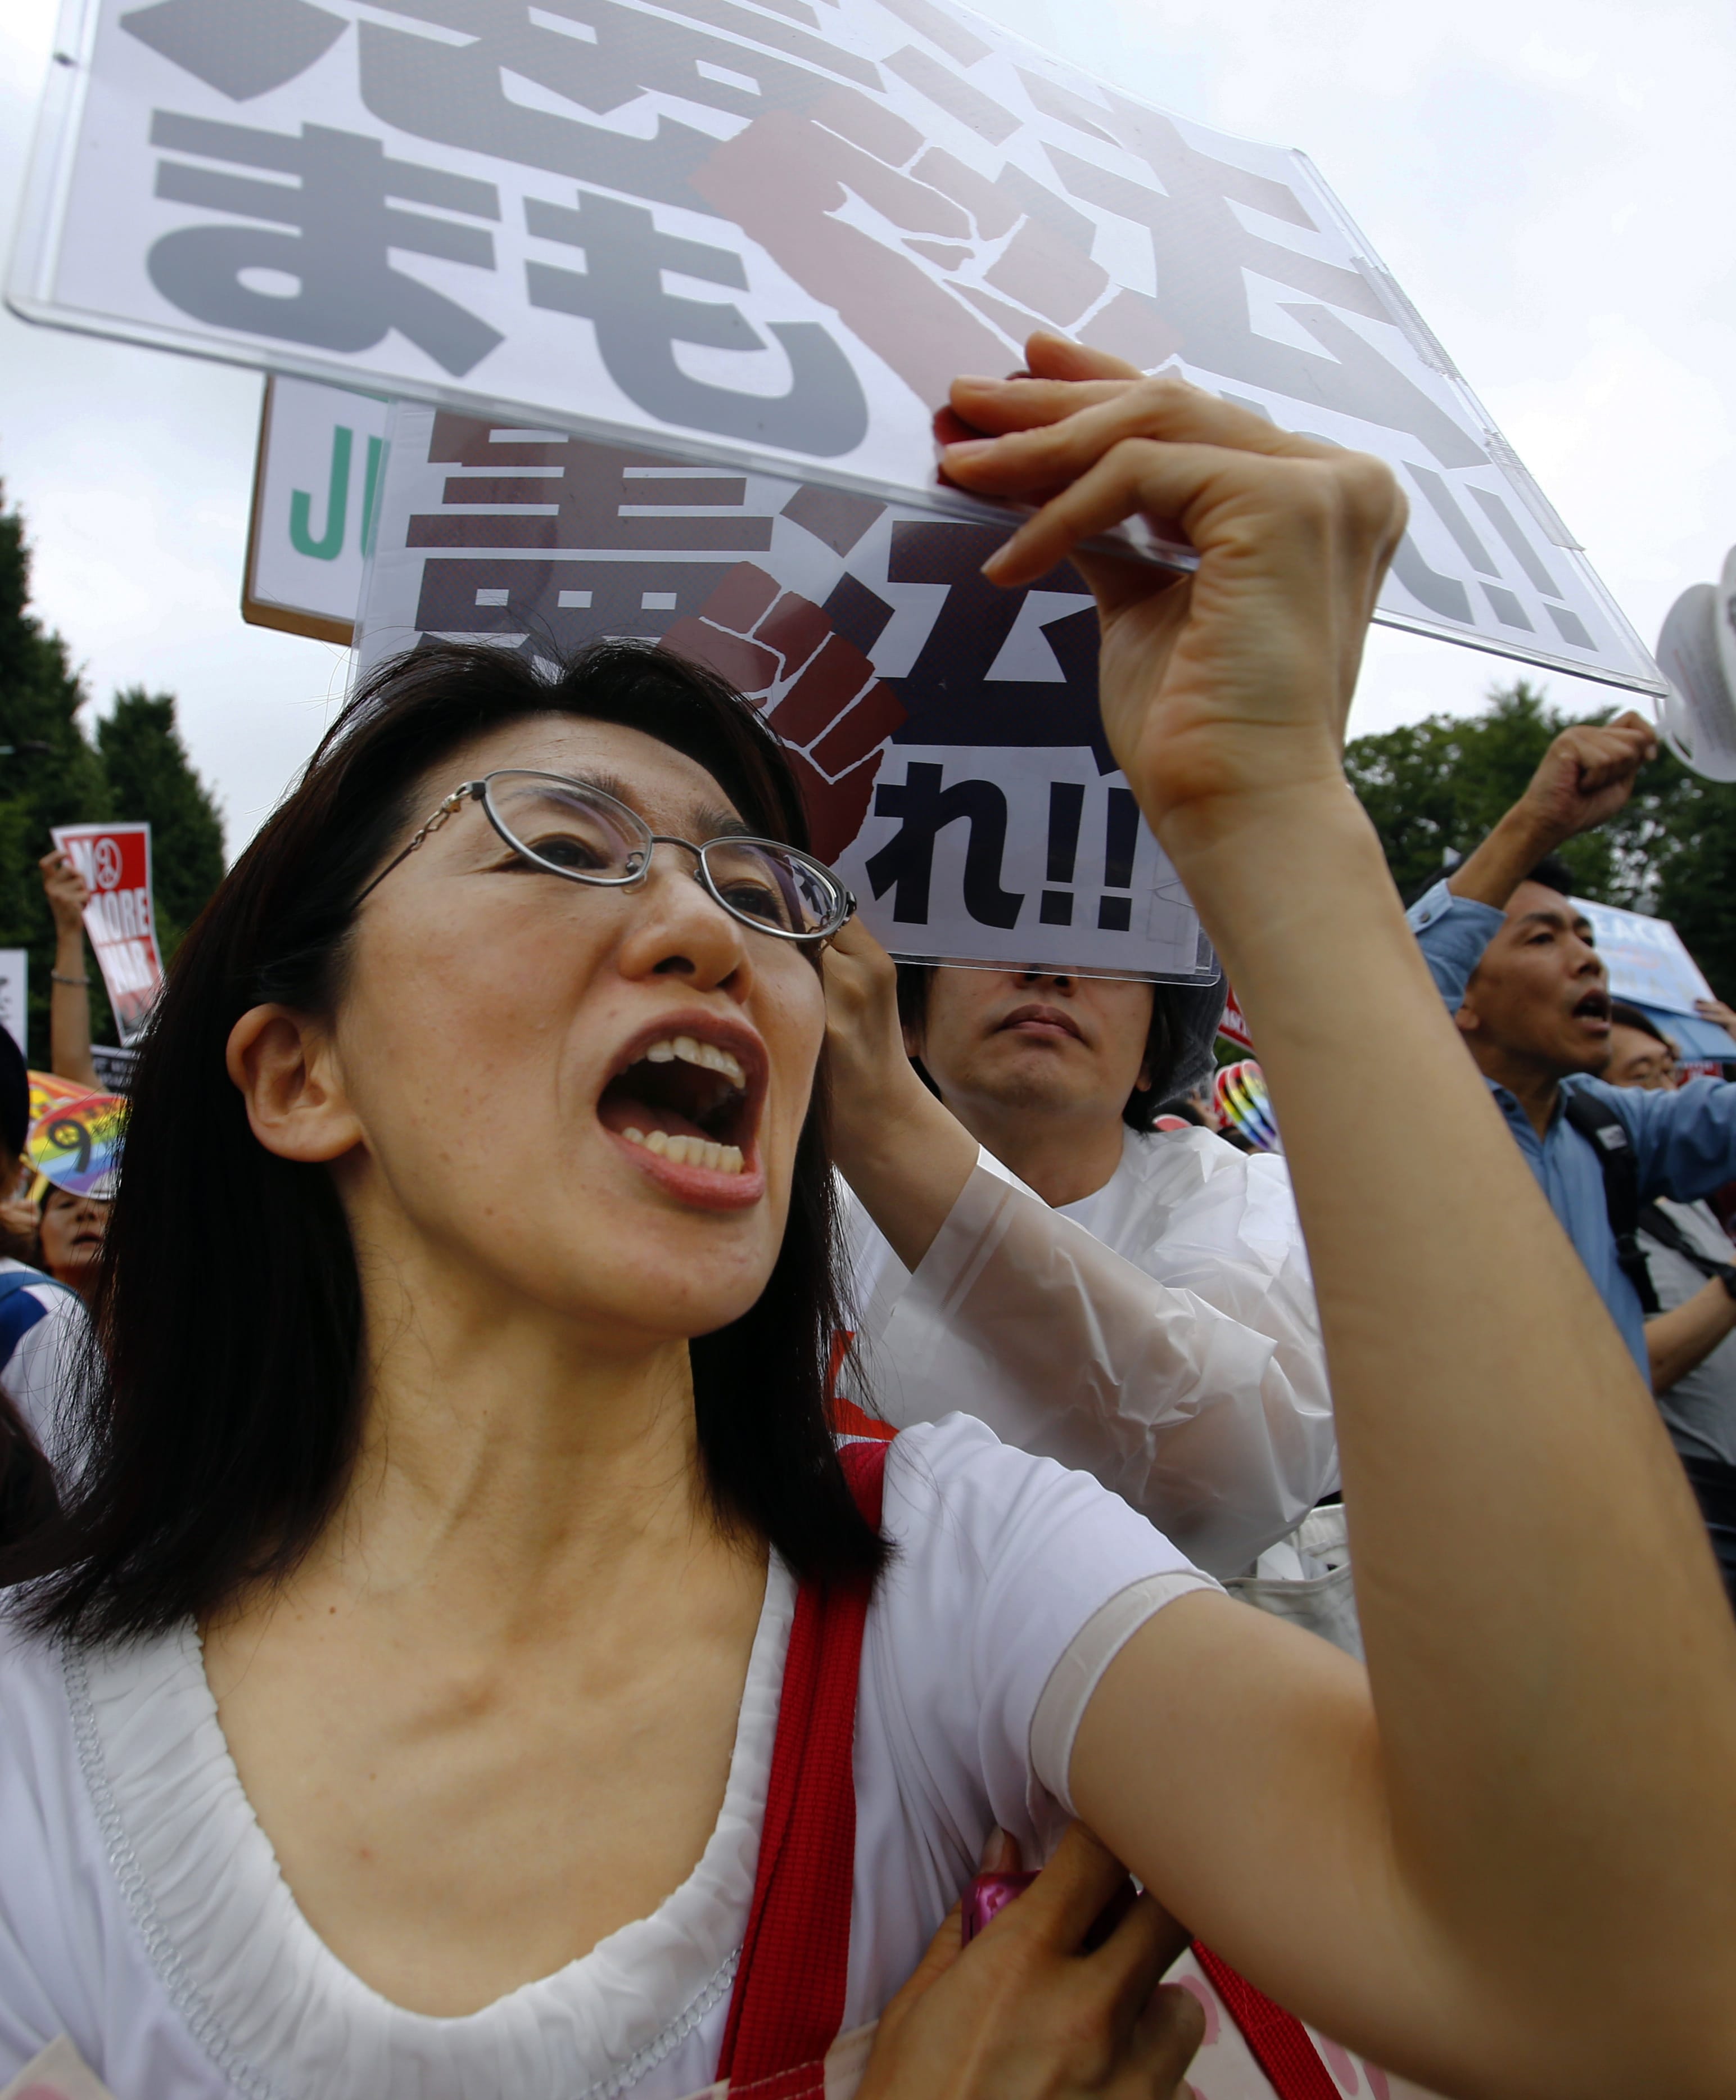 A protester shouts slogans during a rally in front of the National Diet building in Tokyo, Sunday, Aug. 30, 2015. Thousands of Japanese protested outside the parliament a set of security bills designed to expand the role the country's military. The bills - a cornerstone of Prime Minister's Shinzo Abe's move to shore up Japan's defenses in the face of growing threats in the region - are expected to pass next month despite criticism they undermine Japan&iacute;s post-war pacifism.